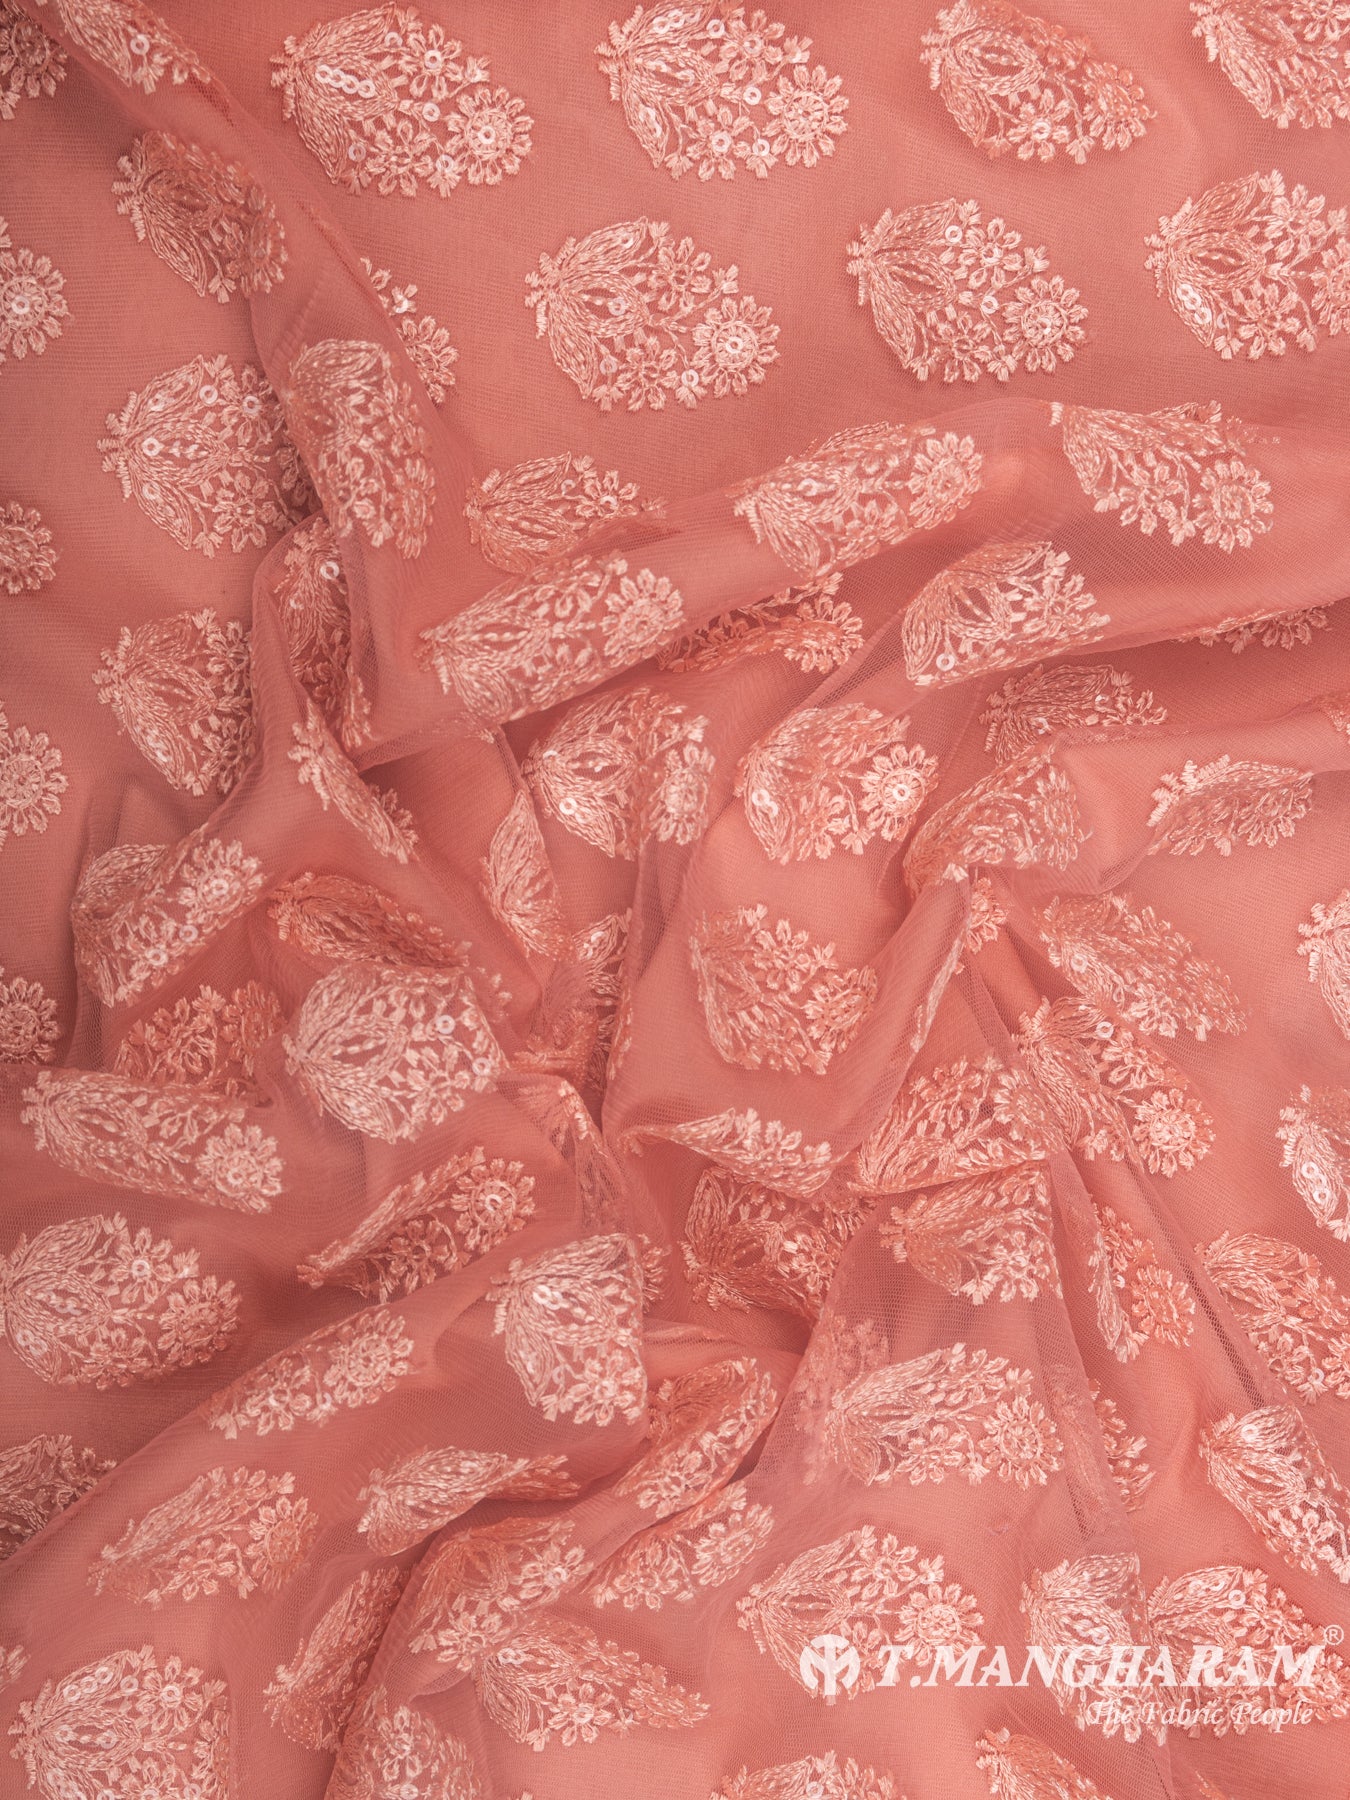 Peach Net Embroidery Fabric - EB4914 view-4